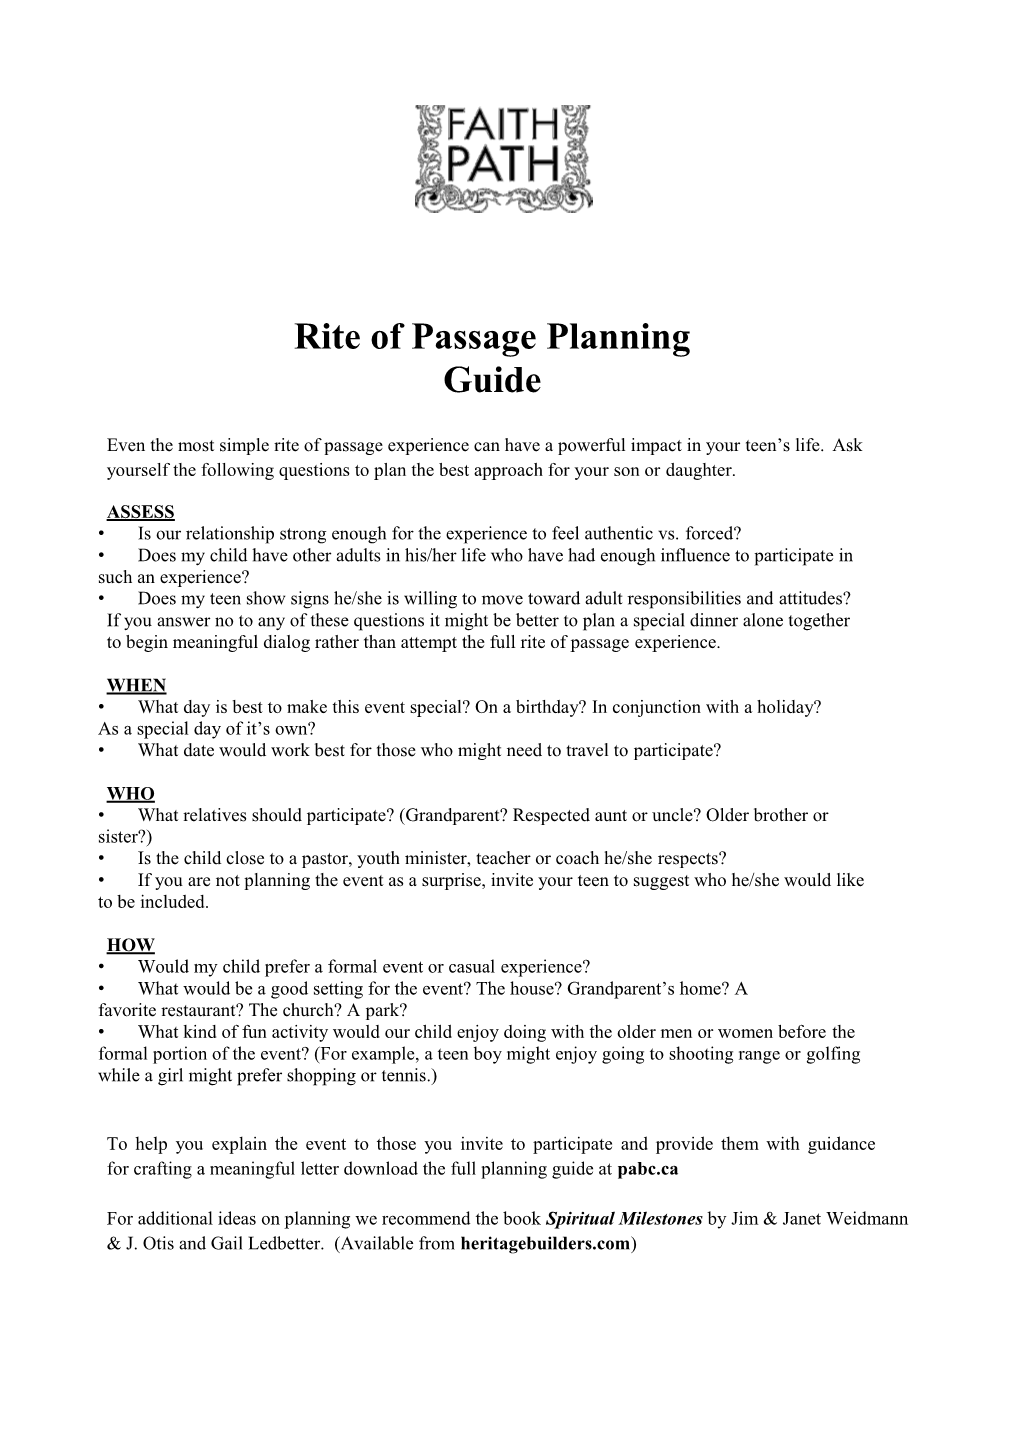 FP Rite of Passage Guide and Sample Letters